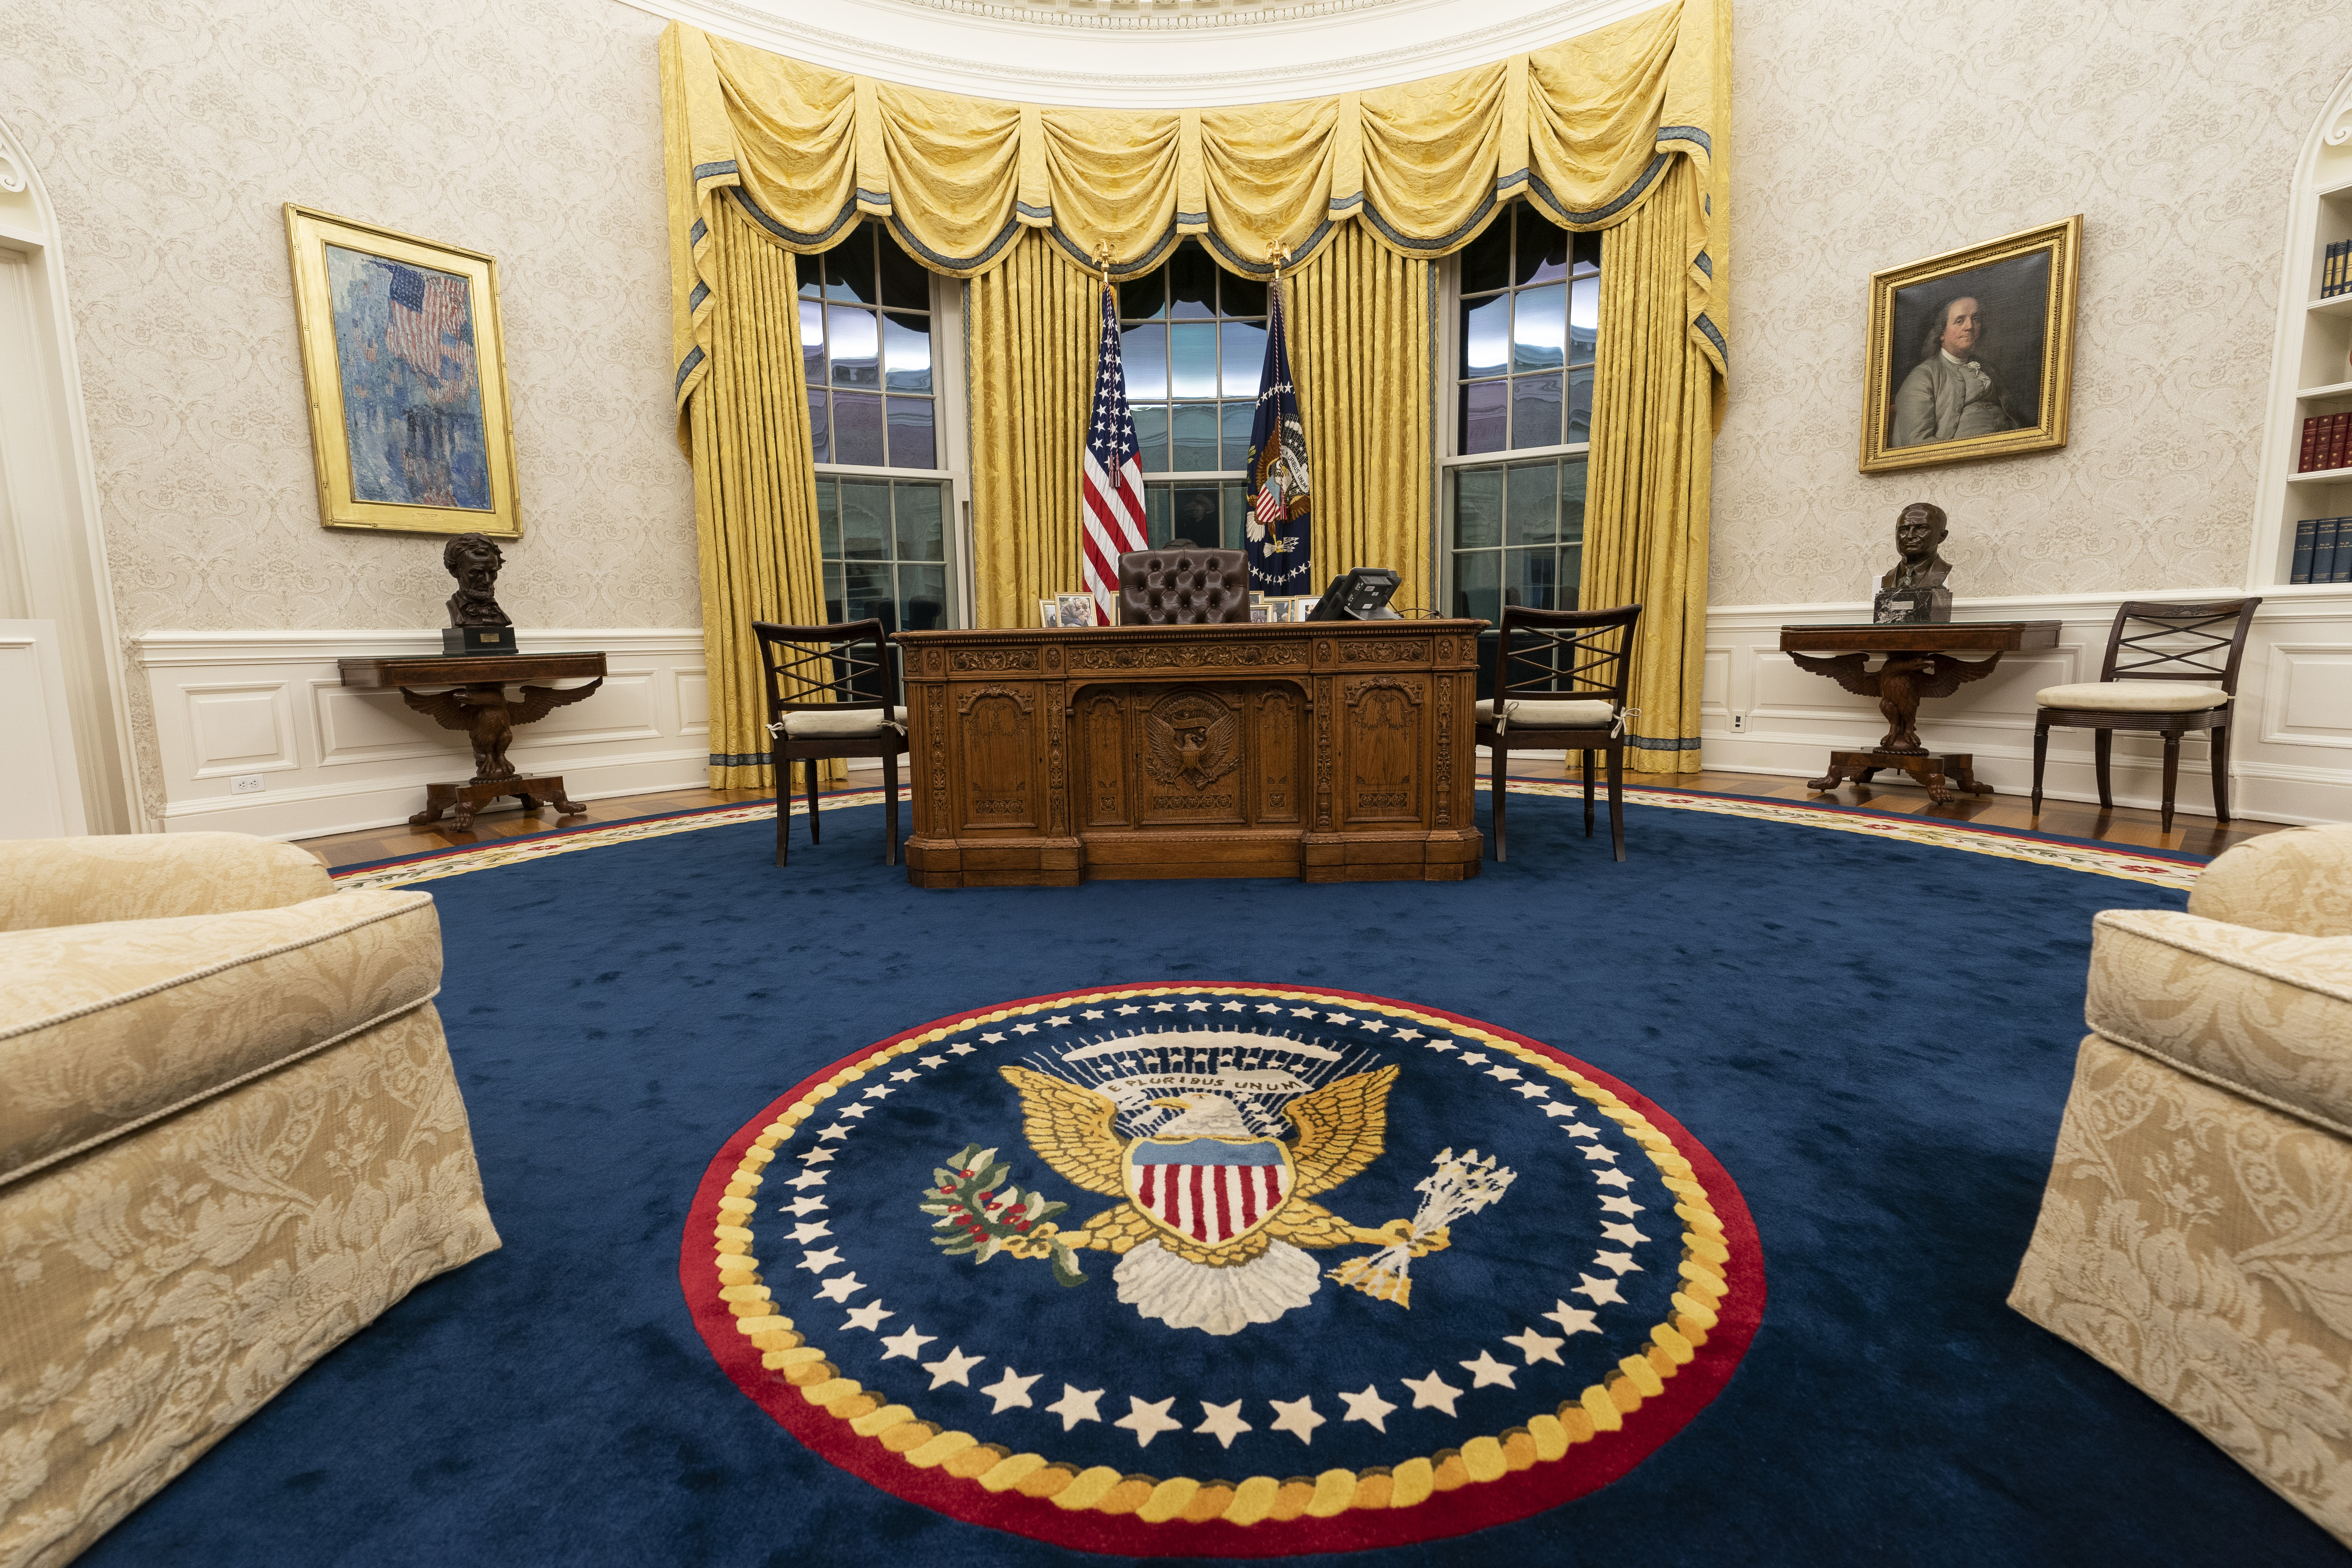 Joe Biden redecorates Oval Office for first day on the job